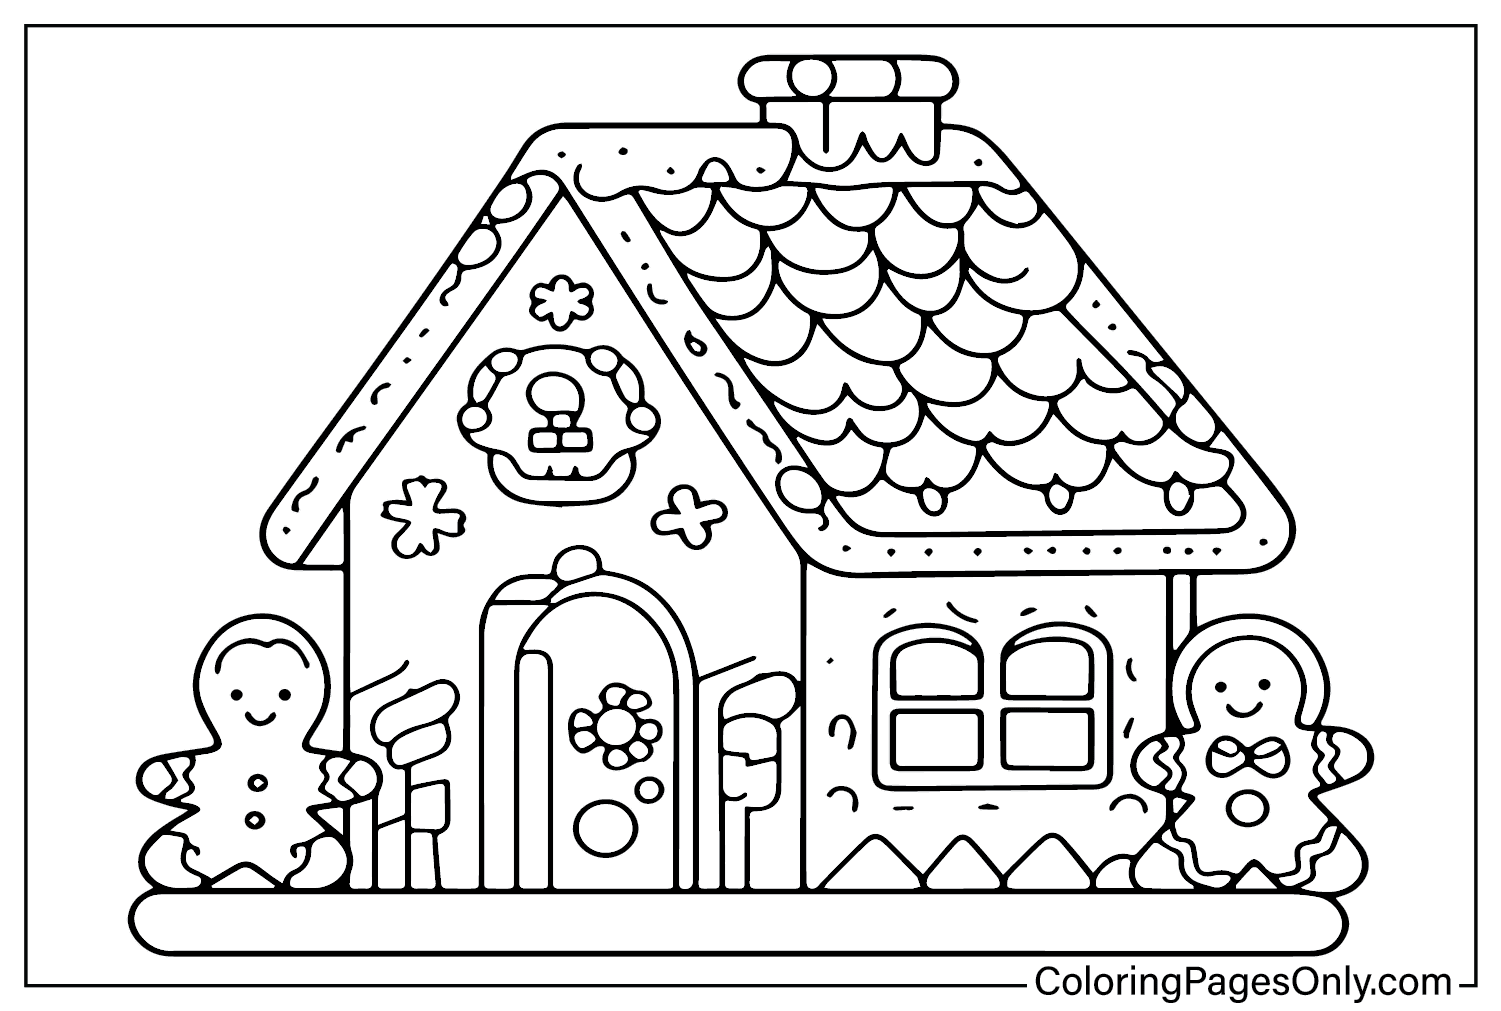 Gingerbread House Coloring Page for Adults - Free Printable Coloring Pages